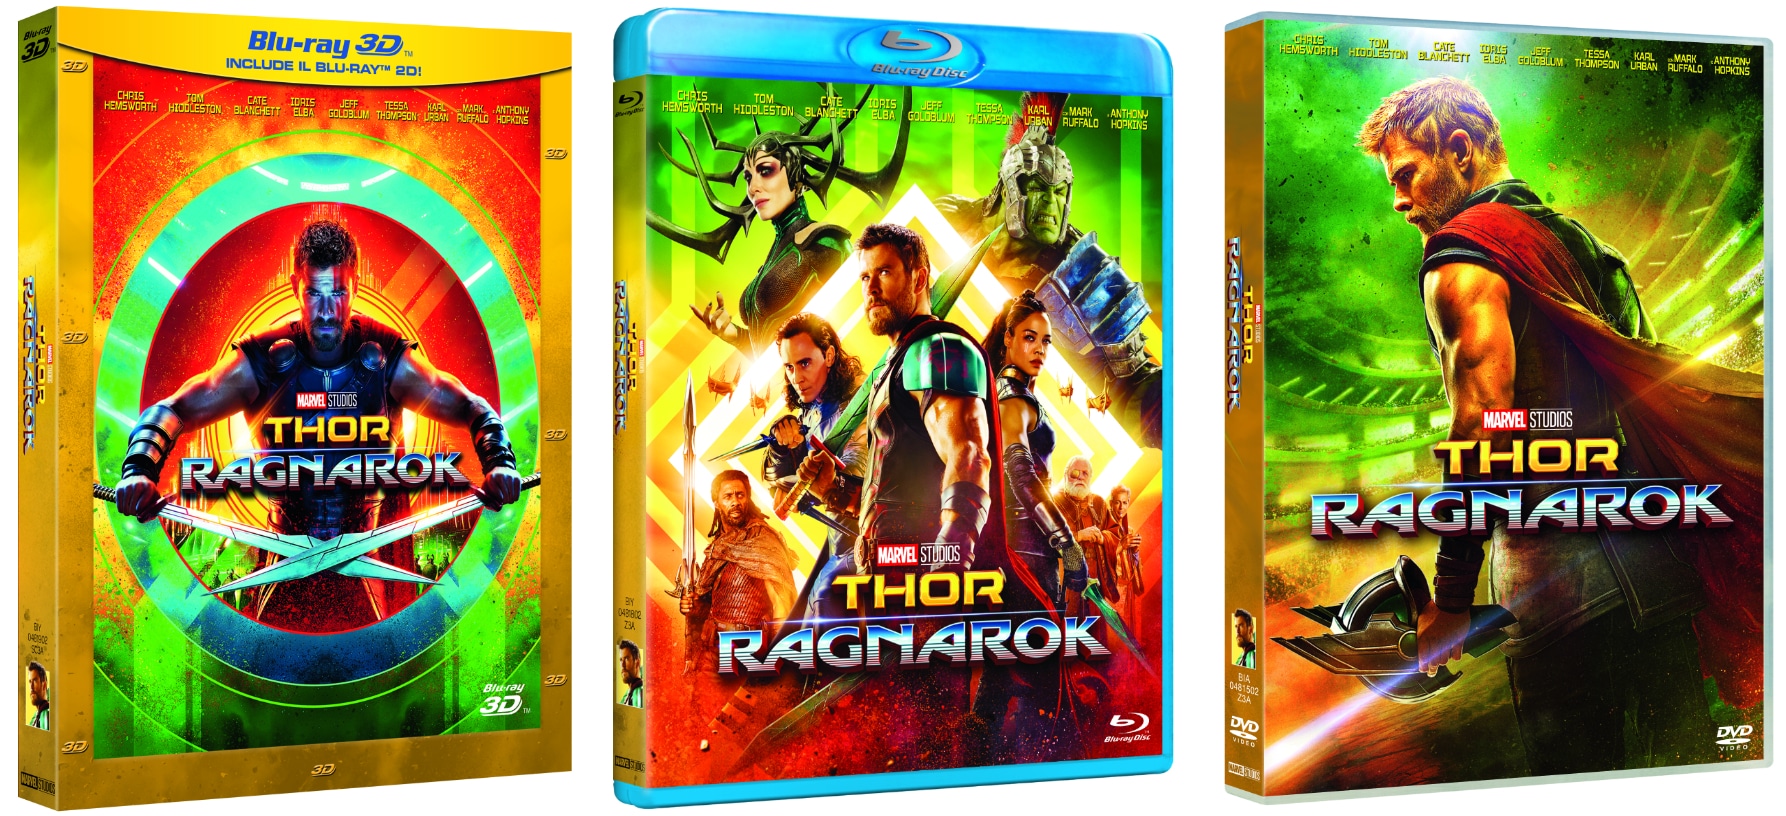 Save the Date! Thor: Ragnarok arriva in Home Video dal 7 marzo